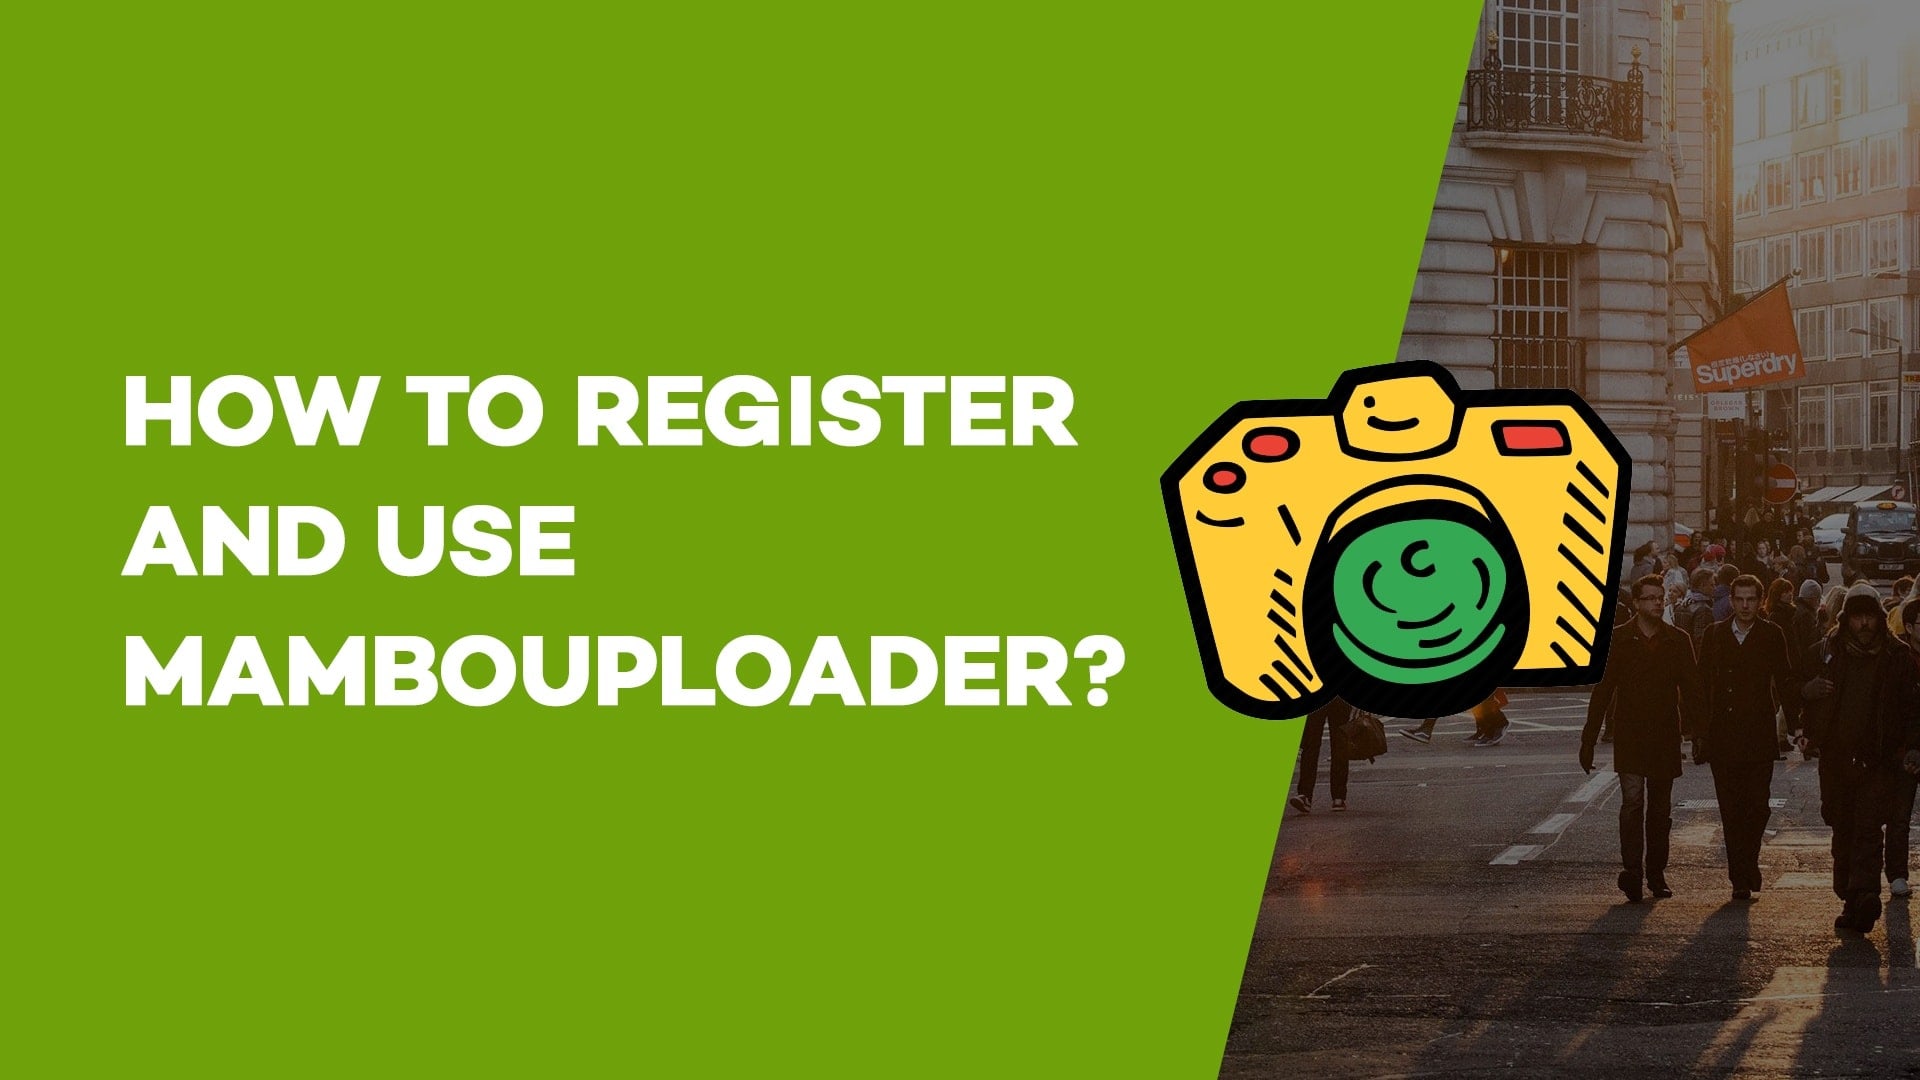 How to Register and Use Mambouploader?